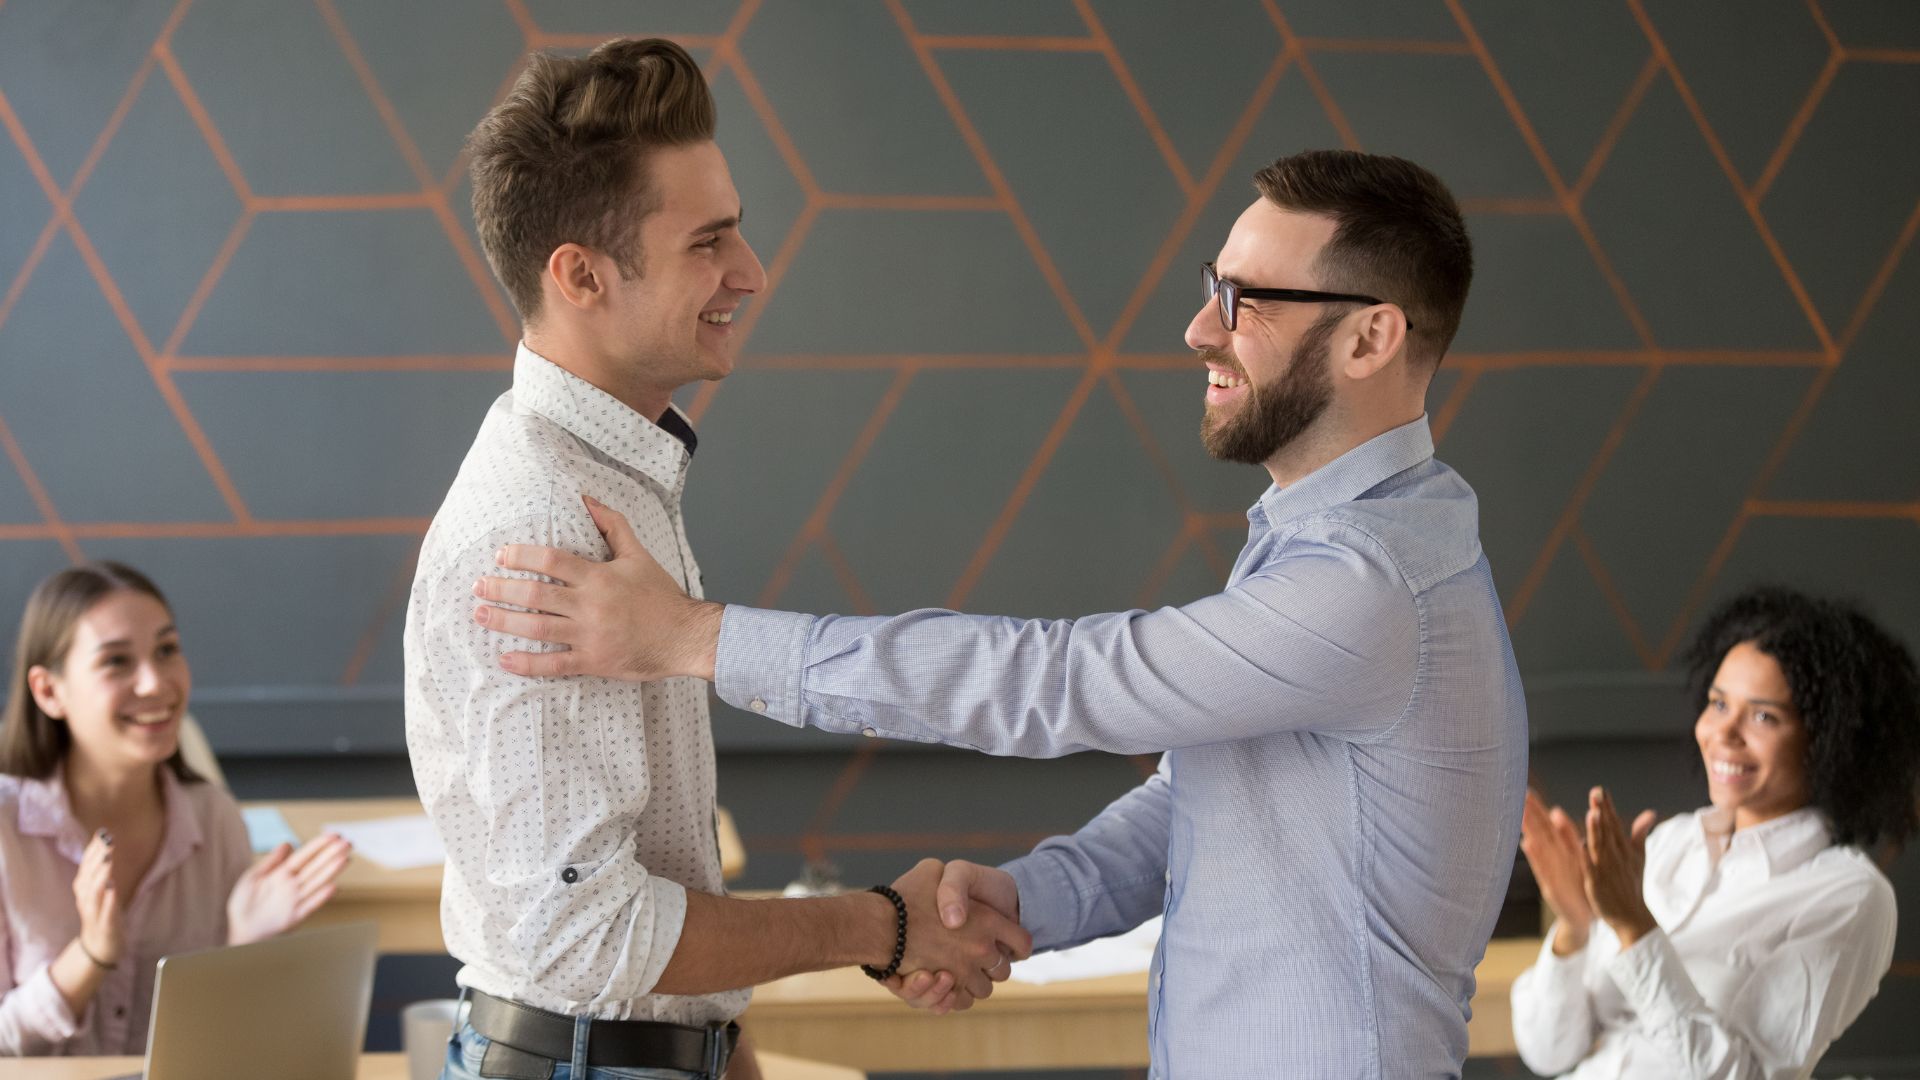 Manager shaking a proactive worker’s hand | Limeade employee engagement program